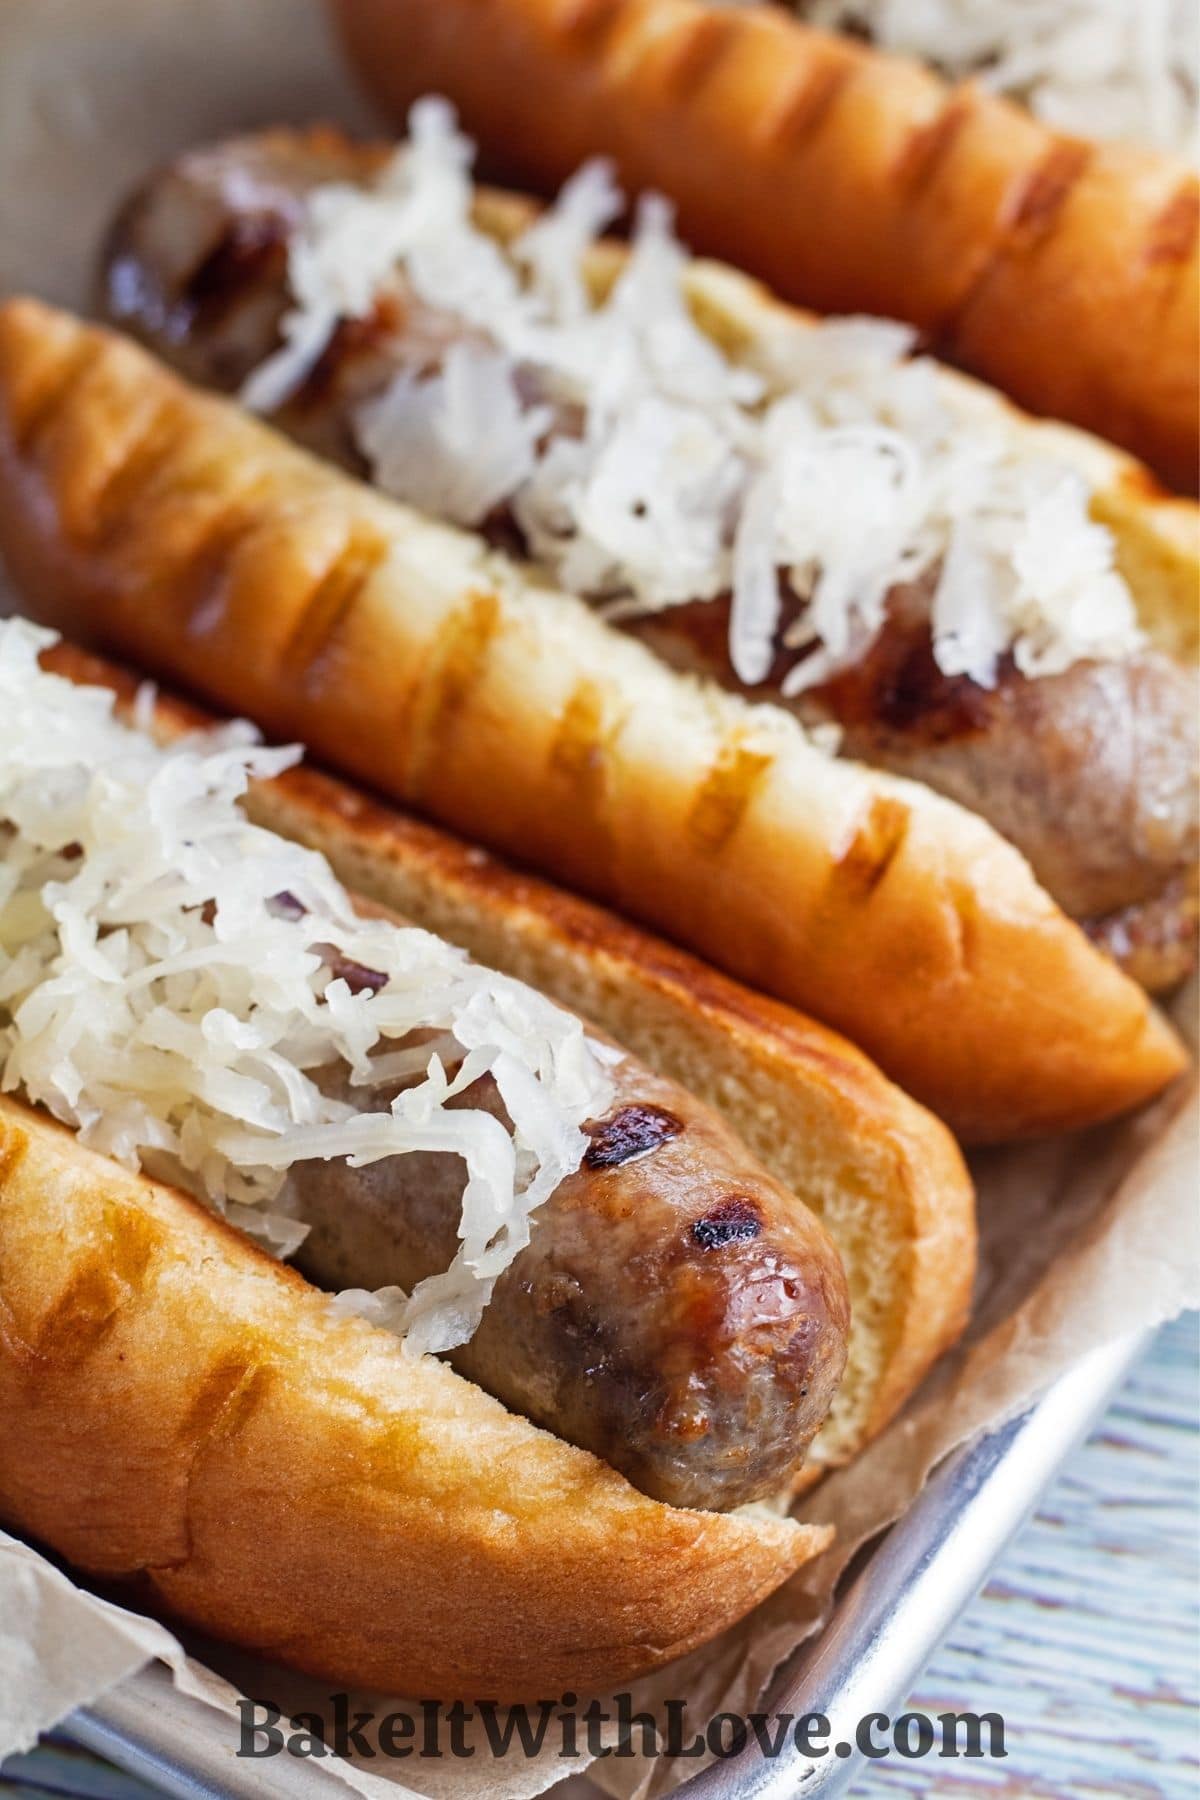 Grilled brats served on tray with German mustard and sauerkraut.